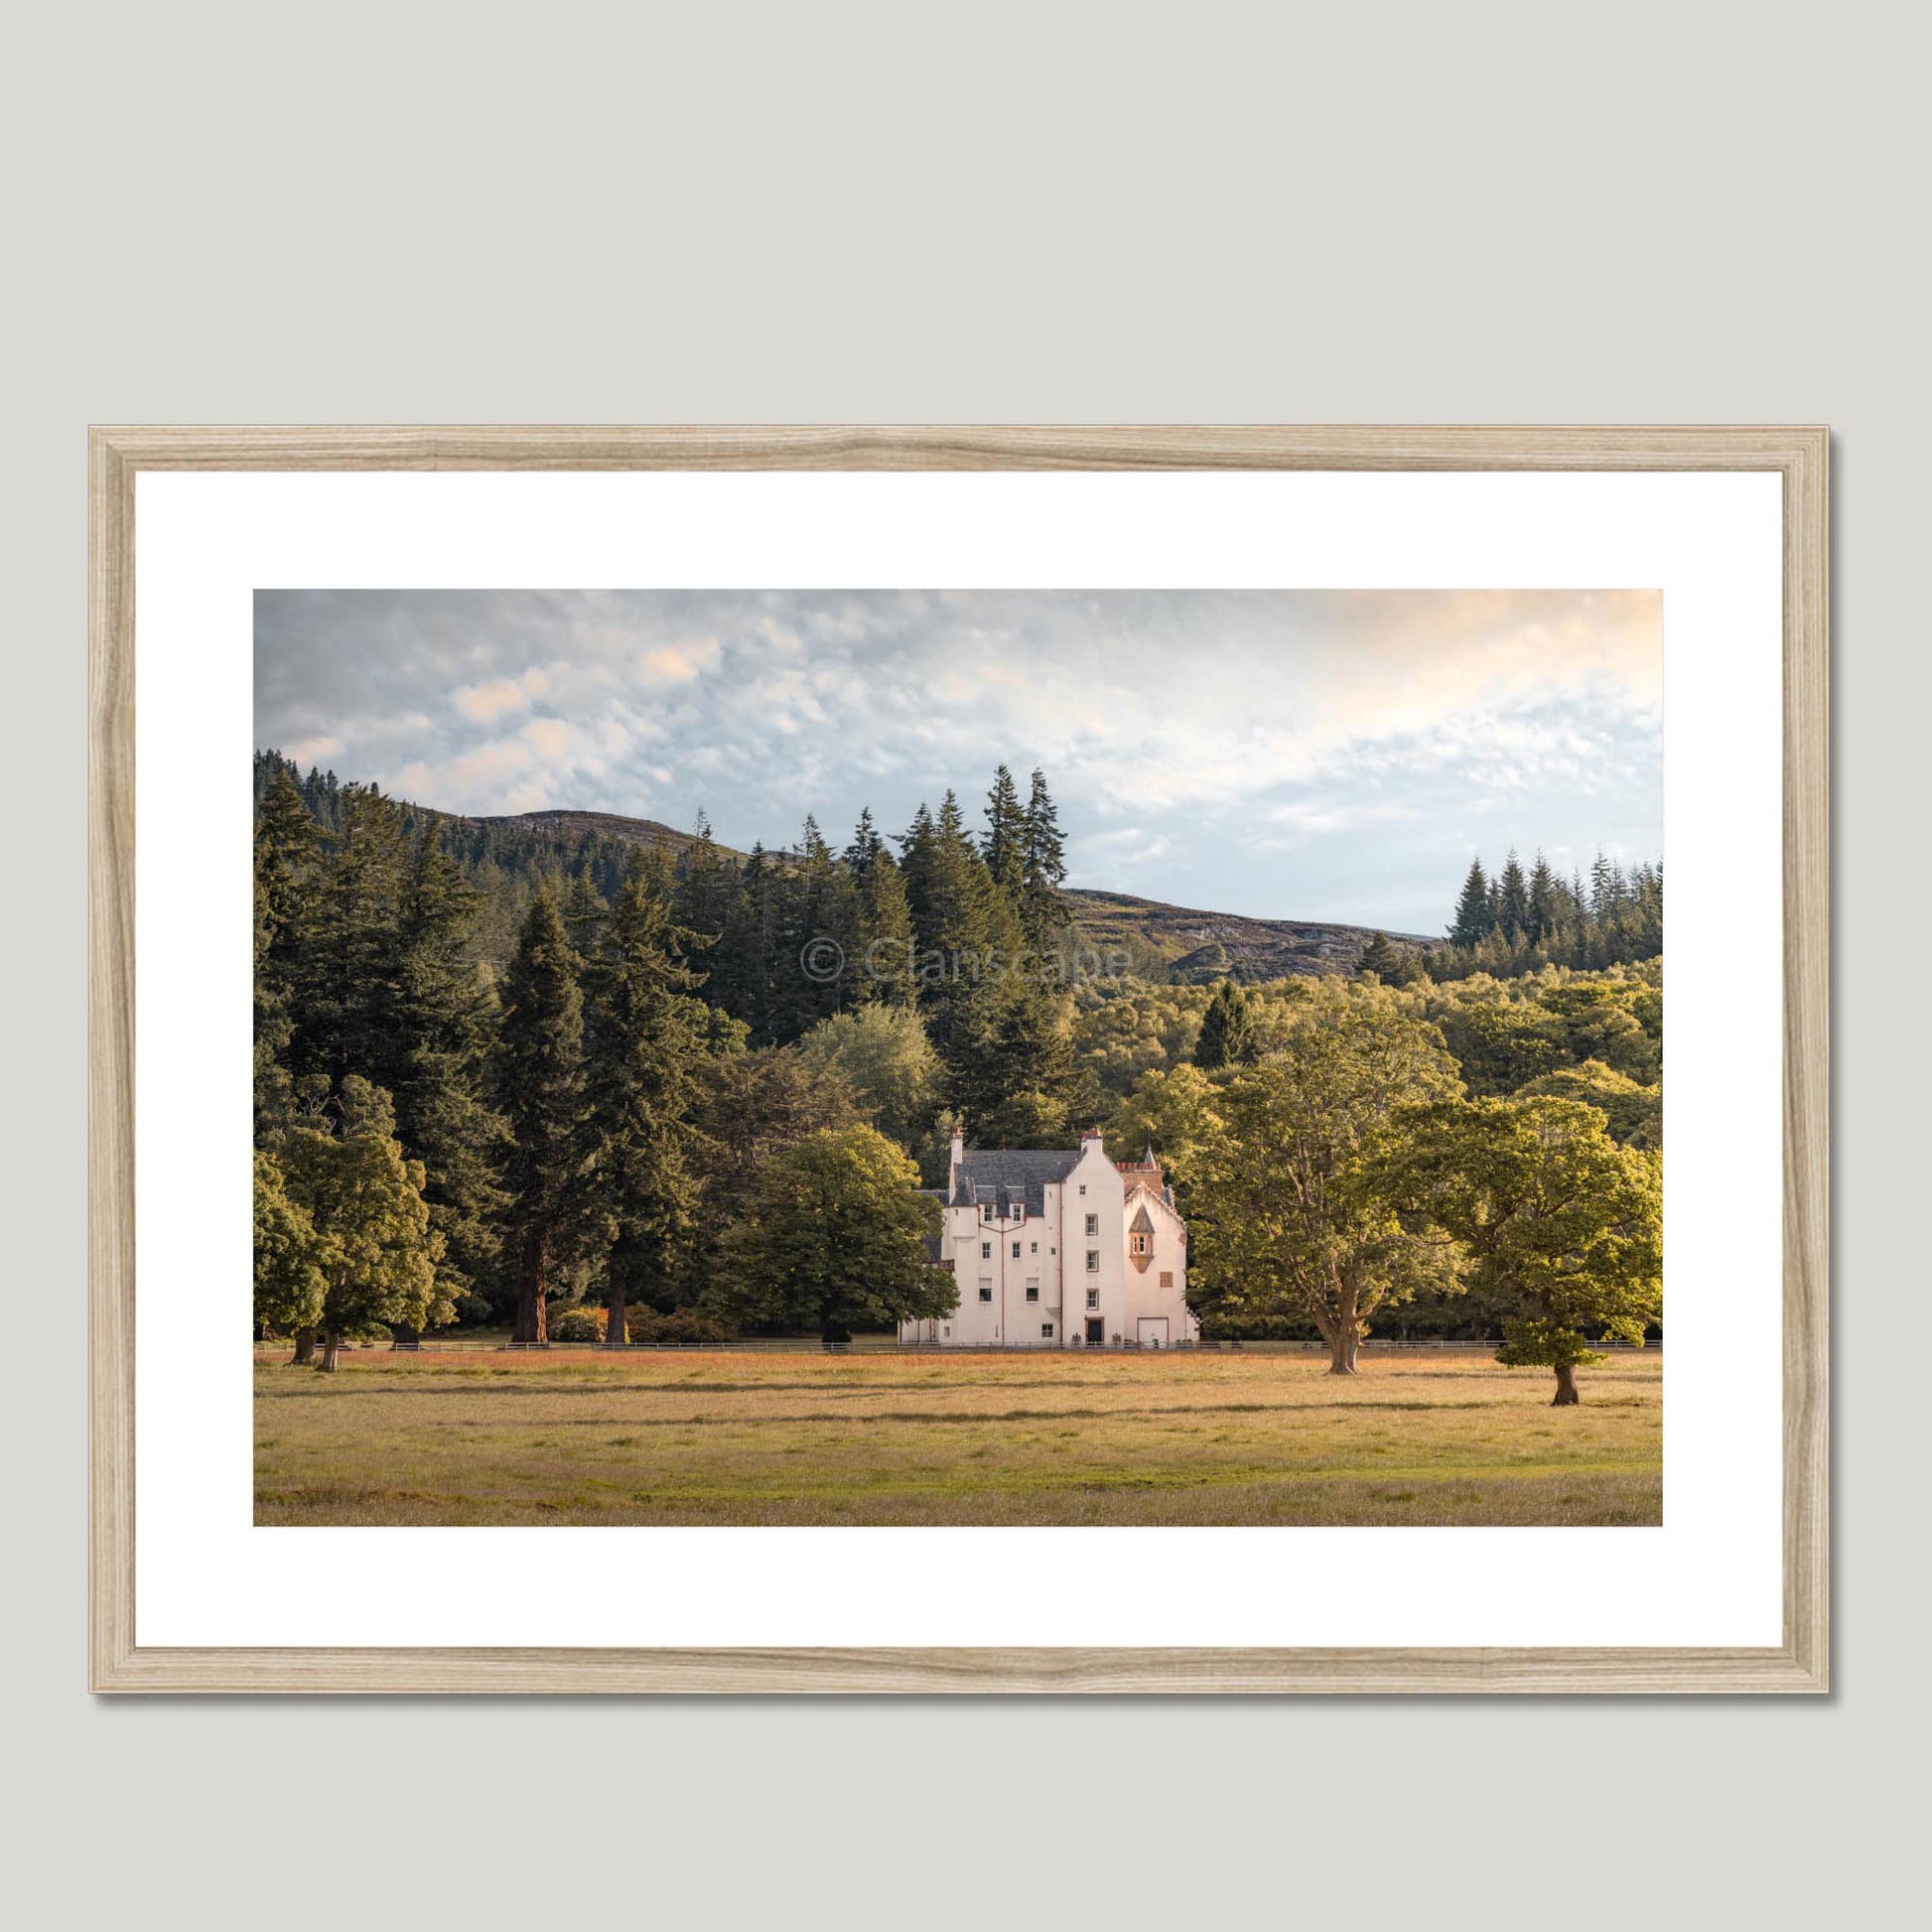 Clan Chisholm - Erchless Castle - Framed & Mounted Photo Print 28"x20" Natural